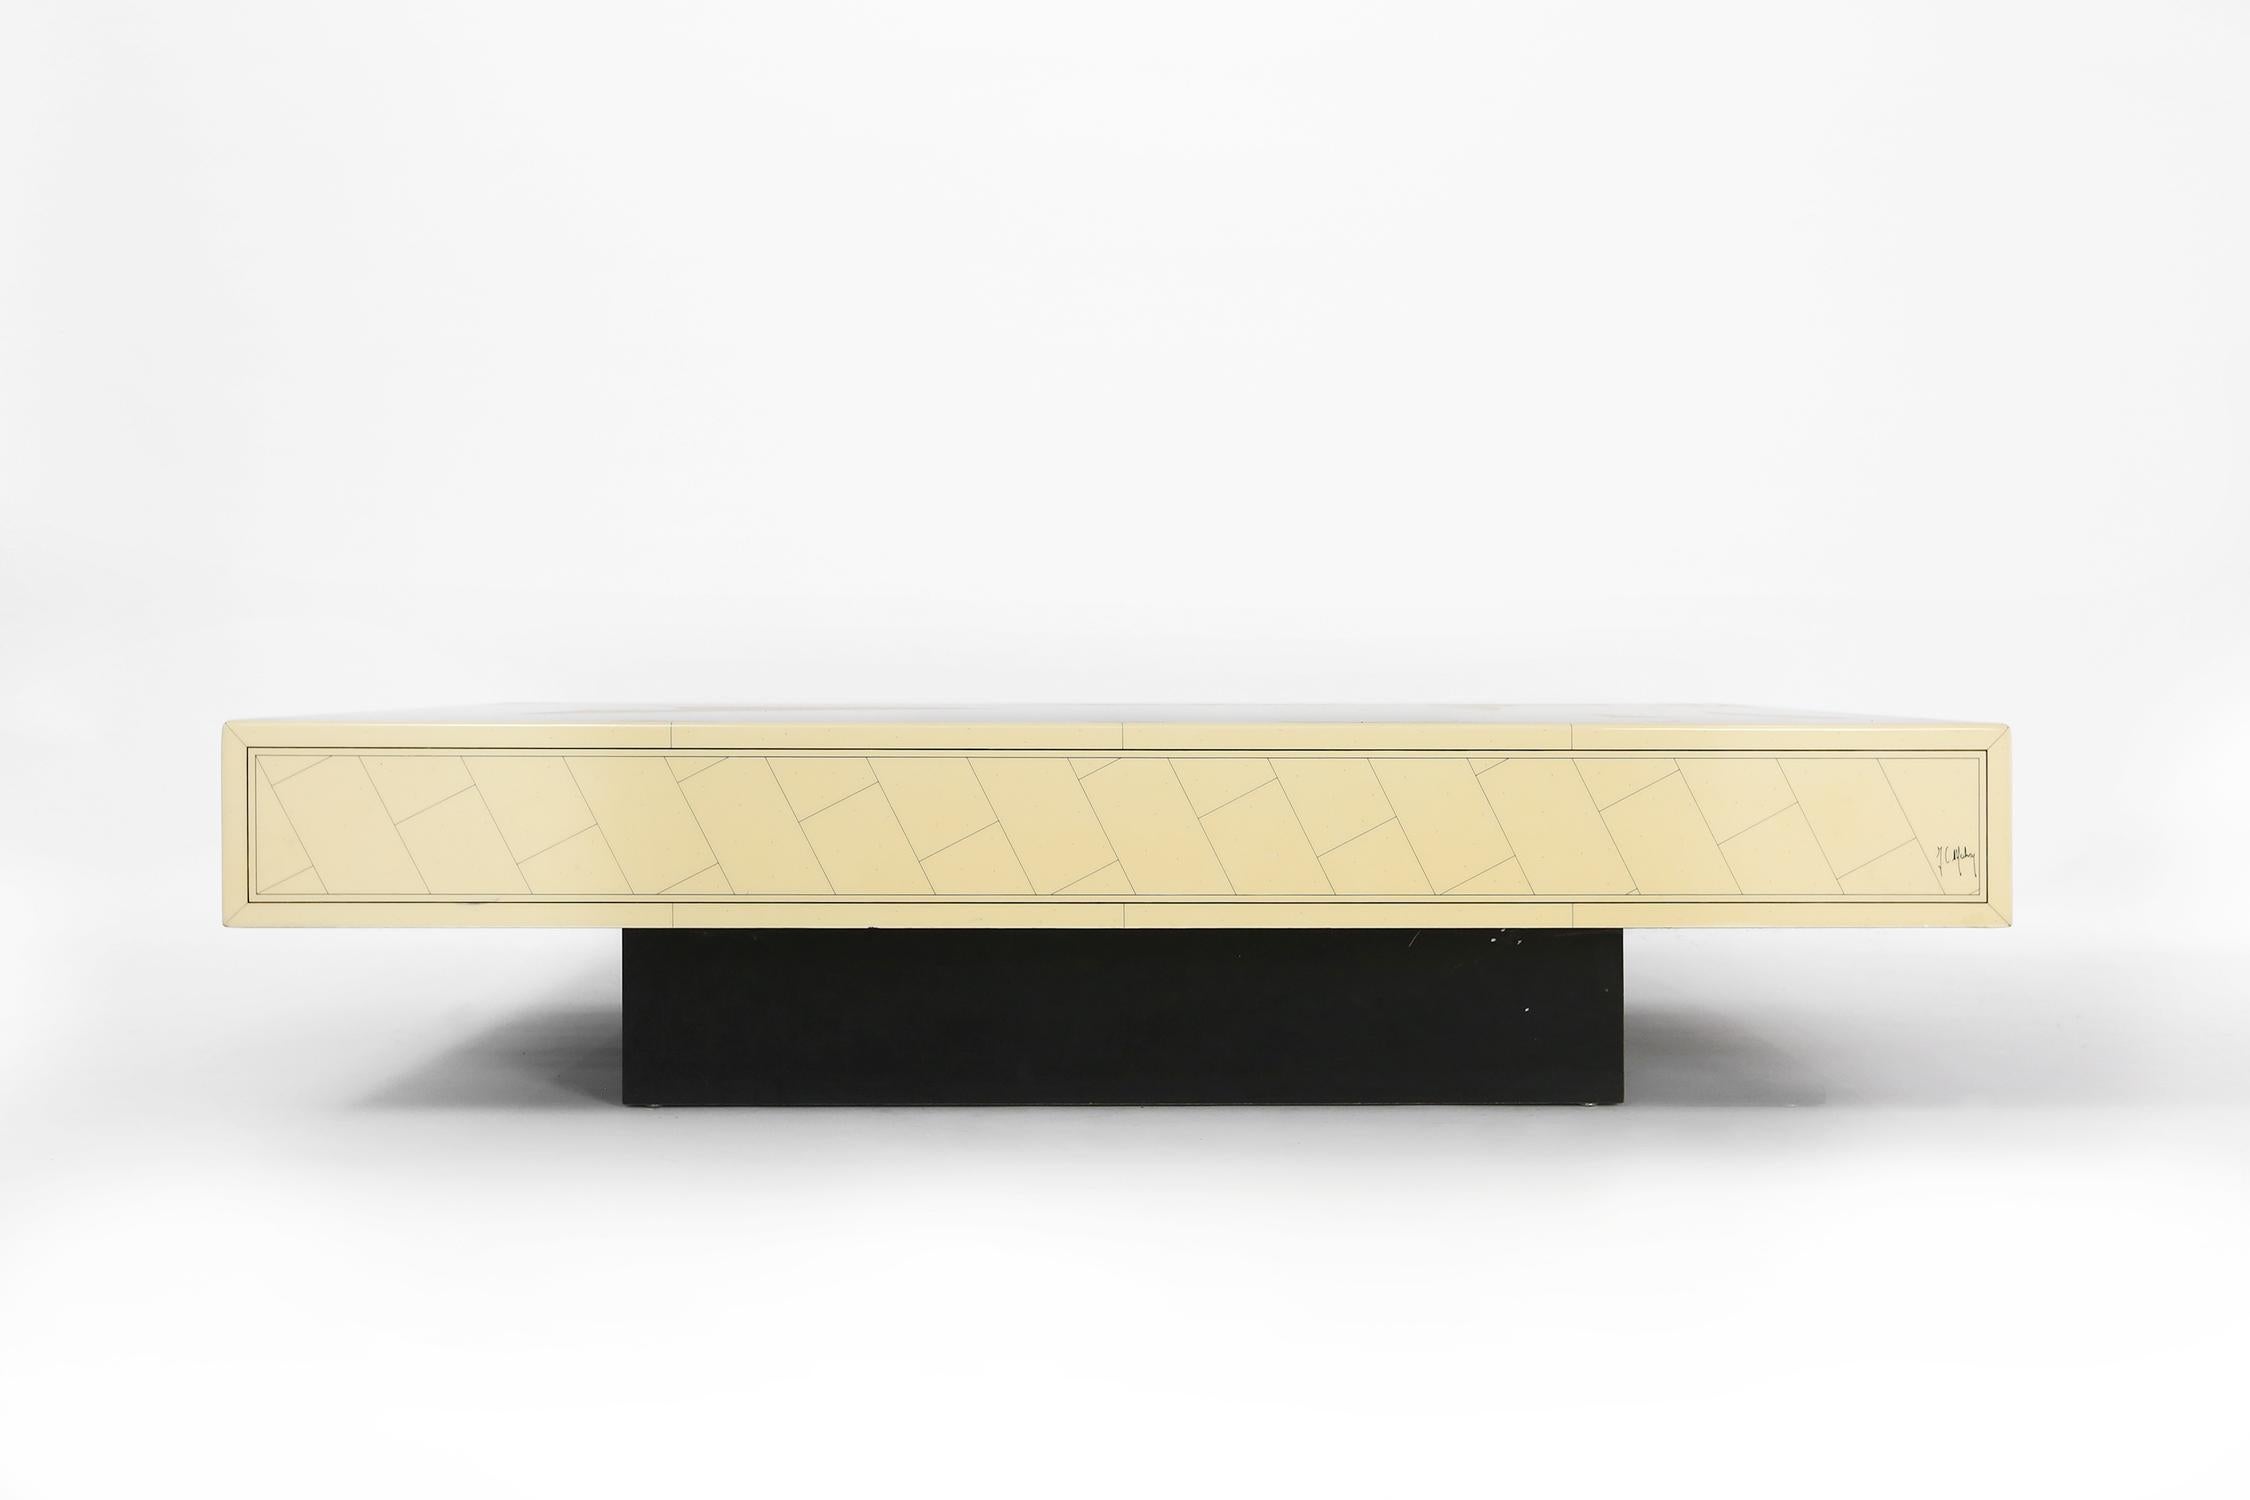 Minimalistic chic large coffee table designed by Jean Claude Mahey, France. A rare find in very good vintage condition. Manufactured in solid wood. Table surface lacquered in creamy white ivory with a luxurious geometric pattern painted in black on